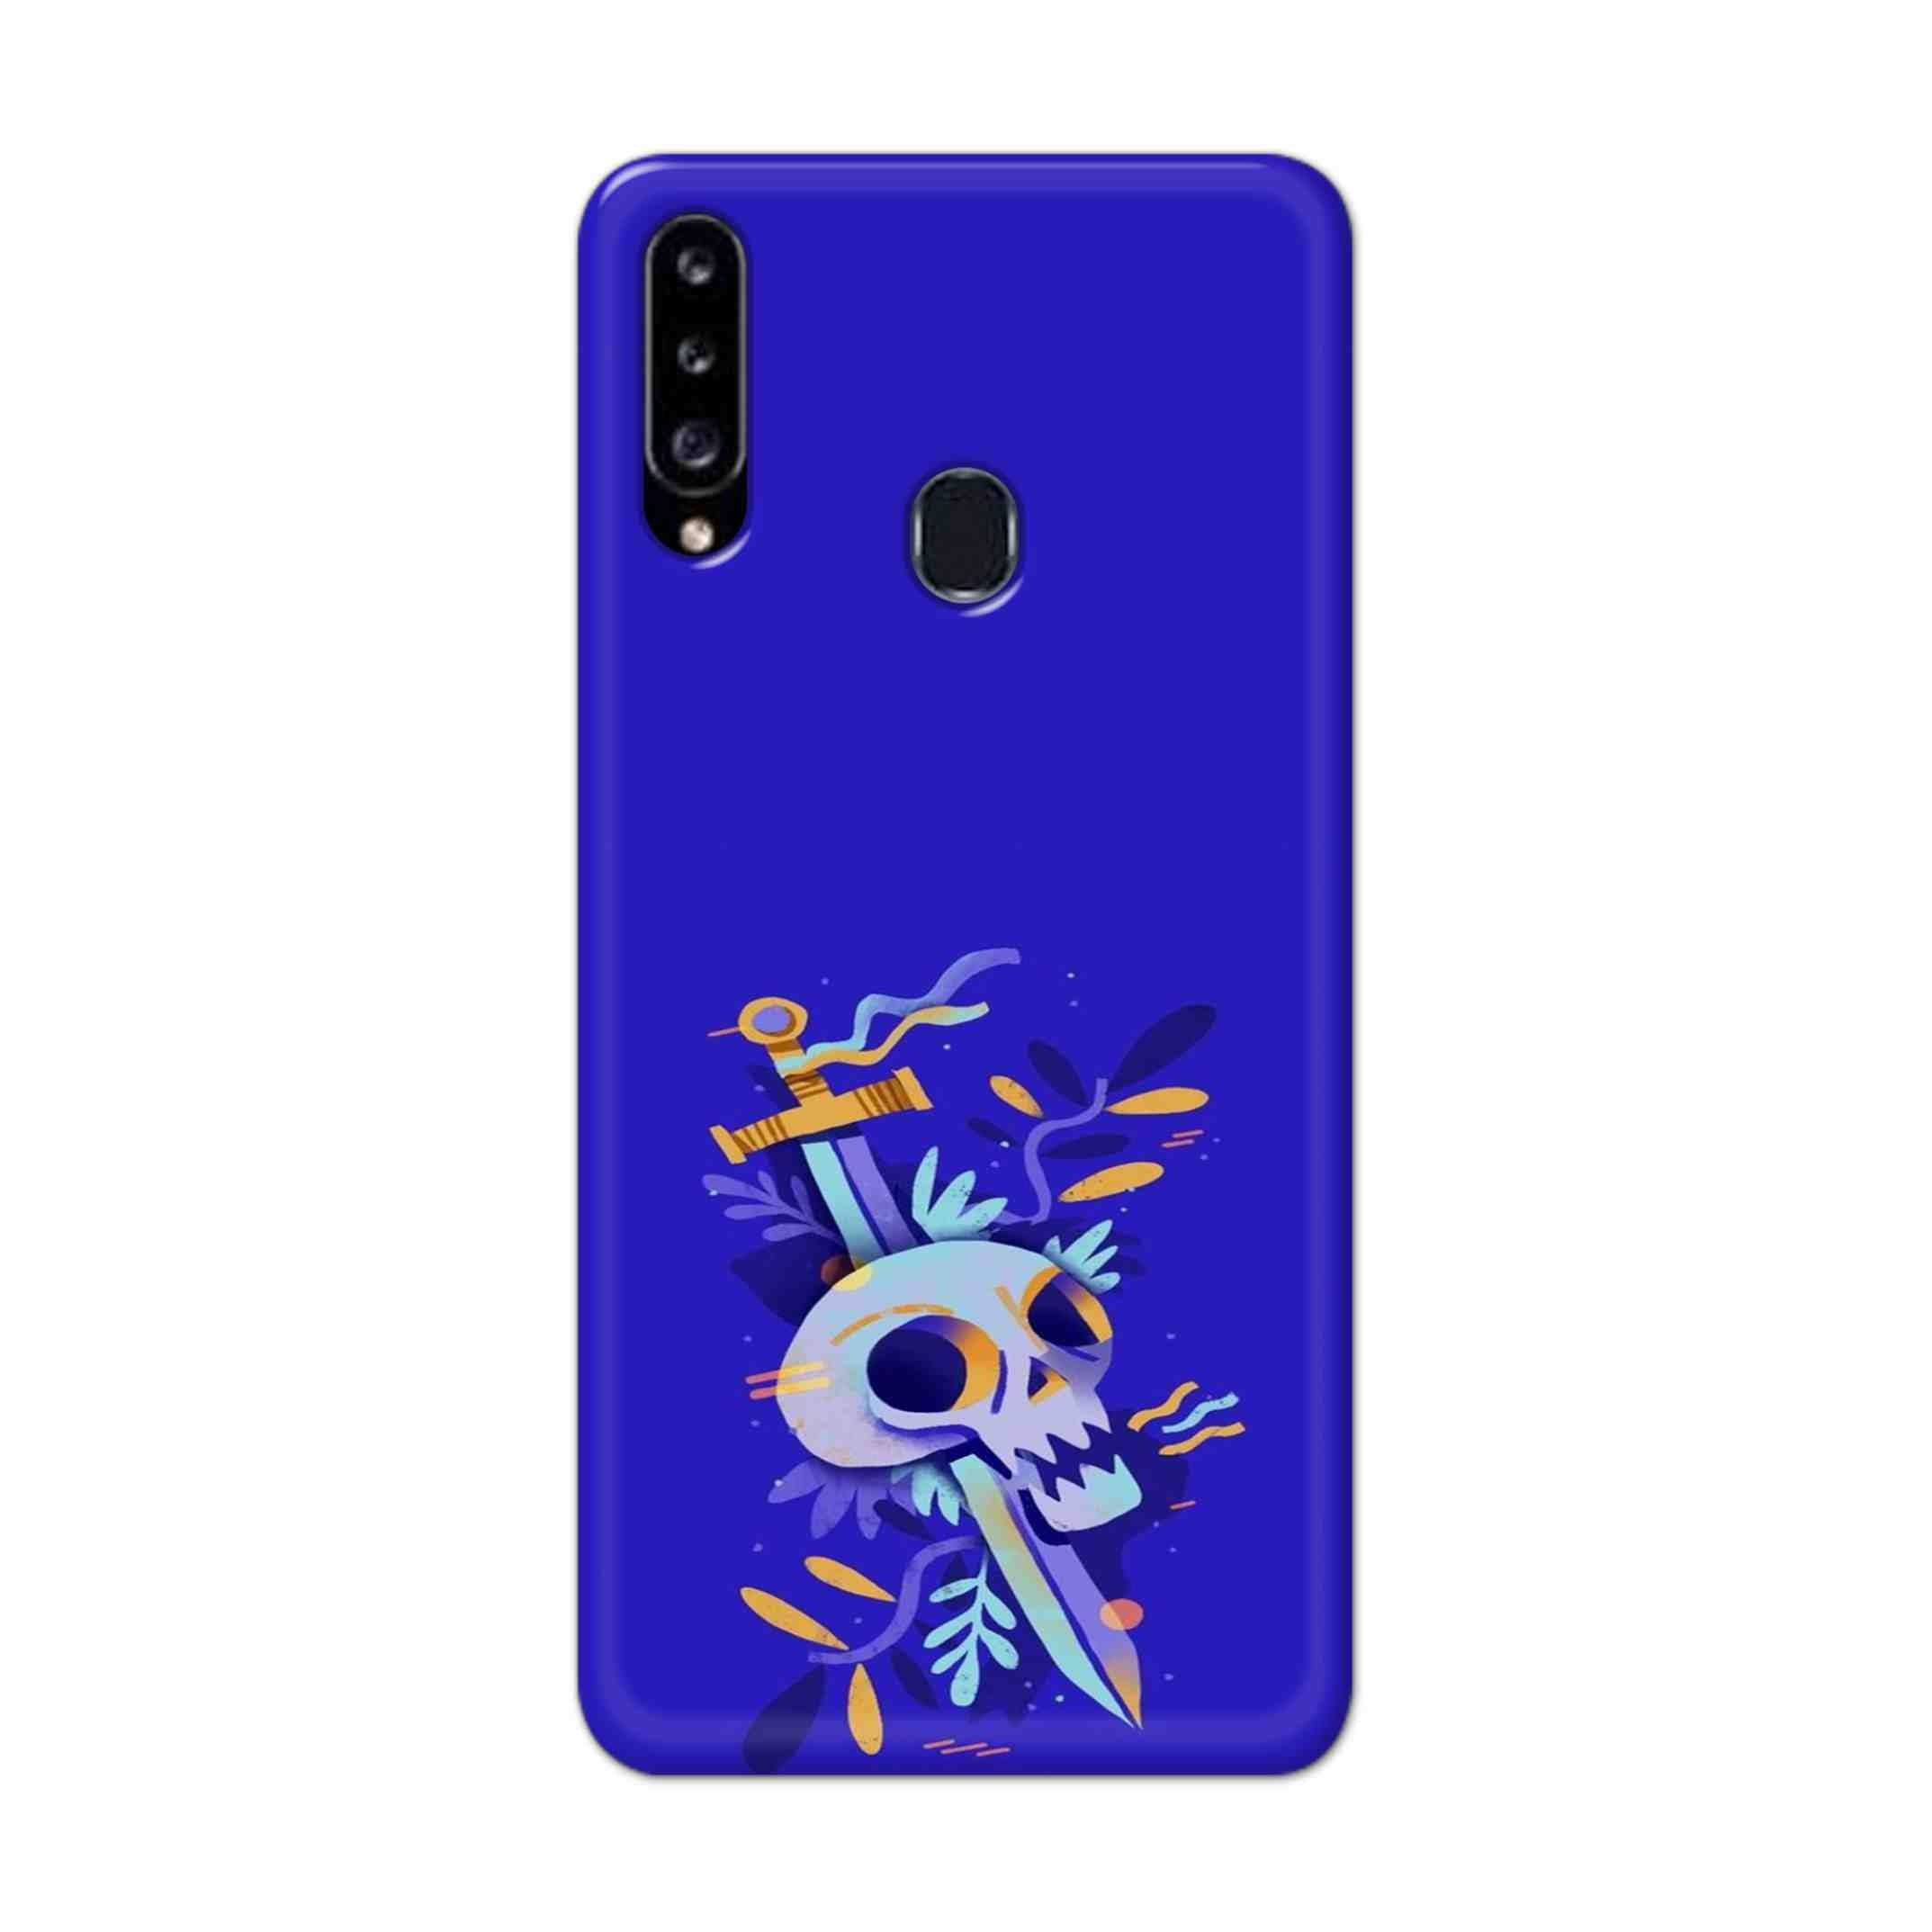 Buy Blue Skull Hard Back Mobile Phone Case Cover For Samsung Galaxy A21 Online